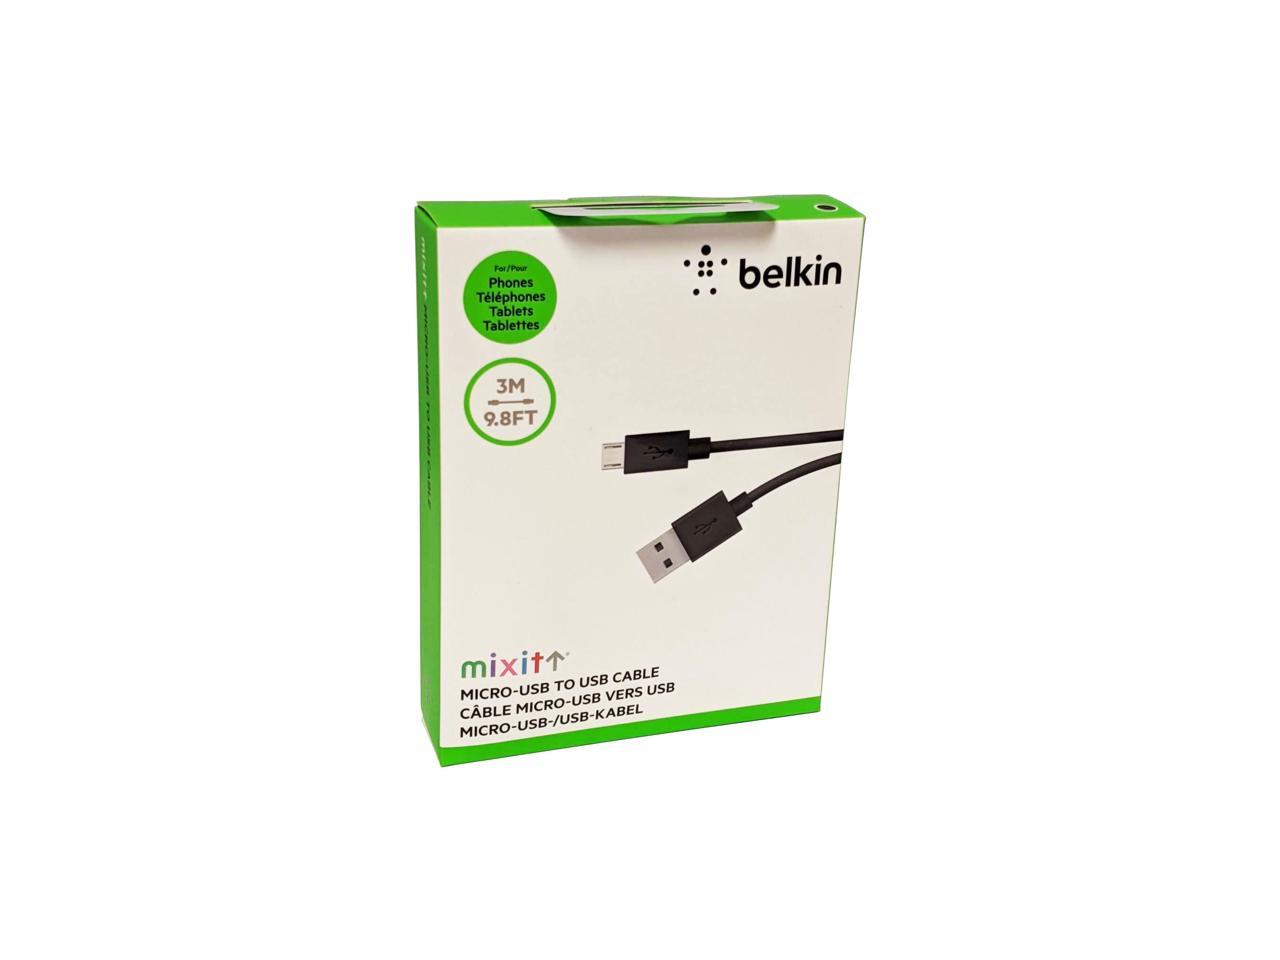 Belkin MIXIT? Micro USB ChargeSync Cable F2CU012bt3M-BLK - image 4 of 11